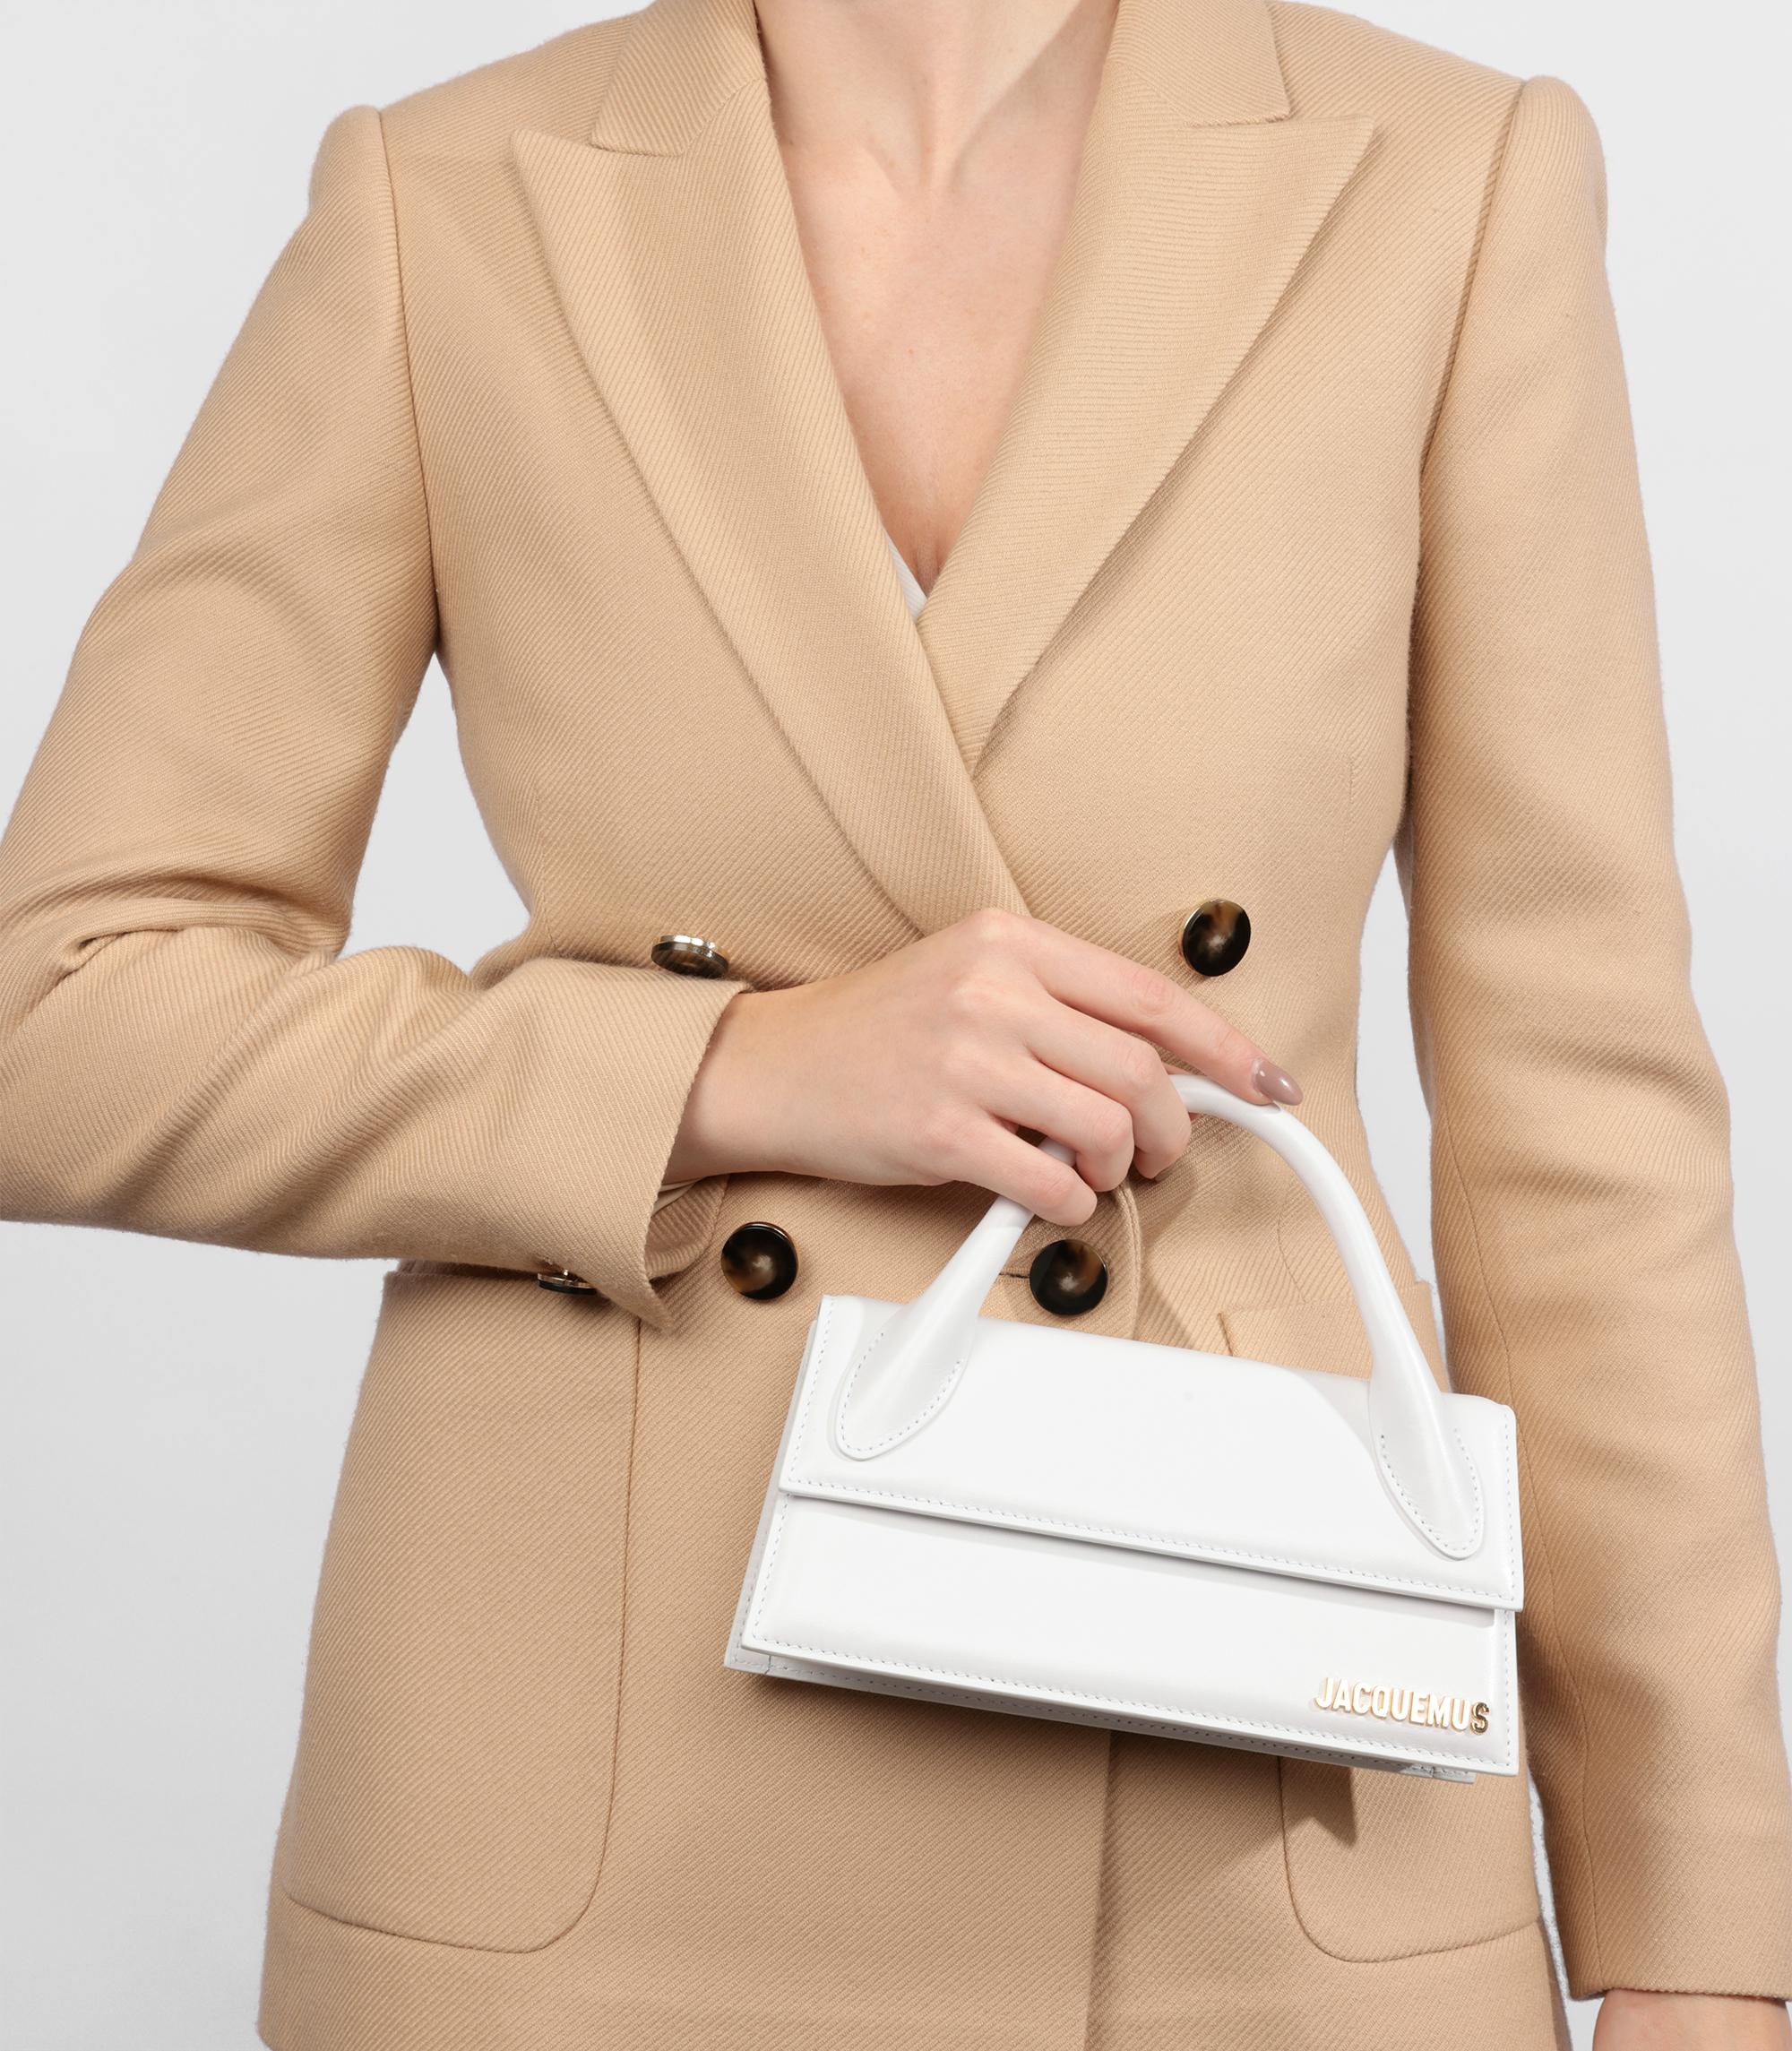 Jacquemus White Smooth Calfskin Leather Le Chiquito Long

Brand- Jacquemus
Model- Le Chiquito Long
Product Type- Crossbody, Shoulder, Top Handle
Age- Circa 2023
Accompanied By- Jacquemus Dust Bag, Shoulder Strap
Colour- White
Hardware-